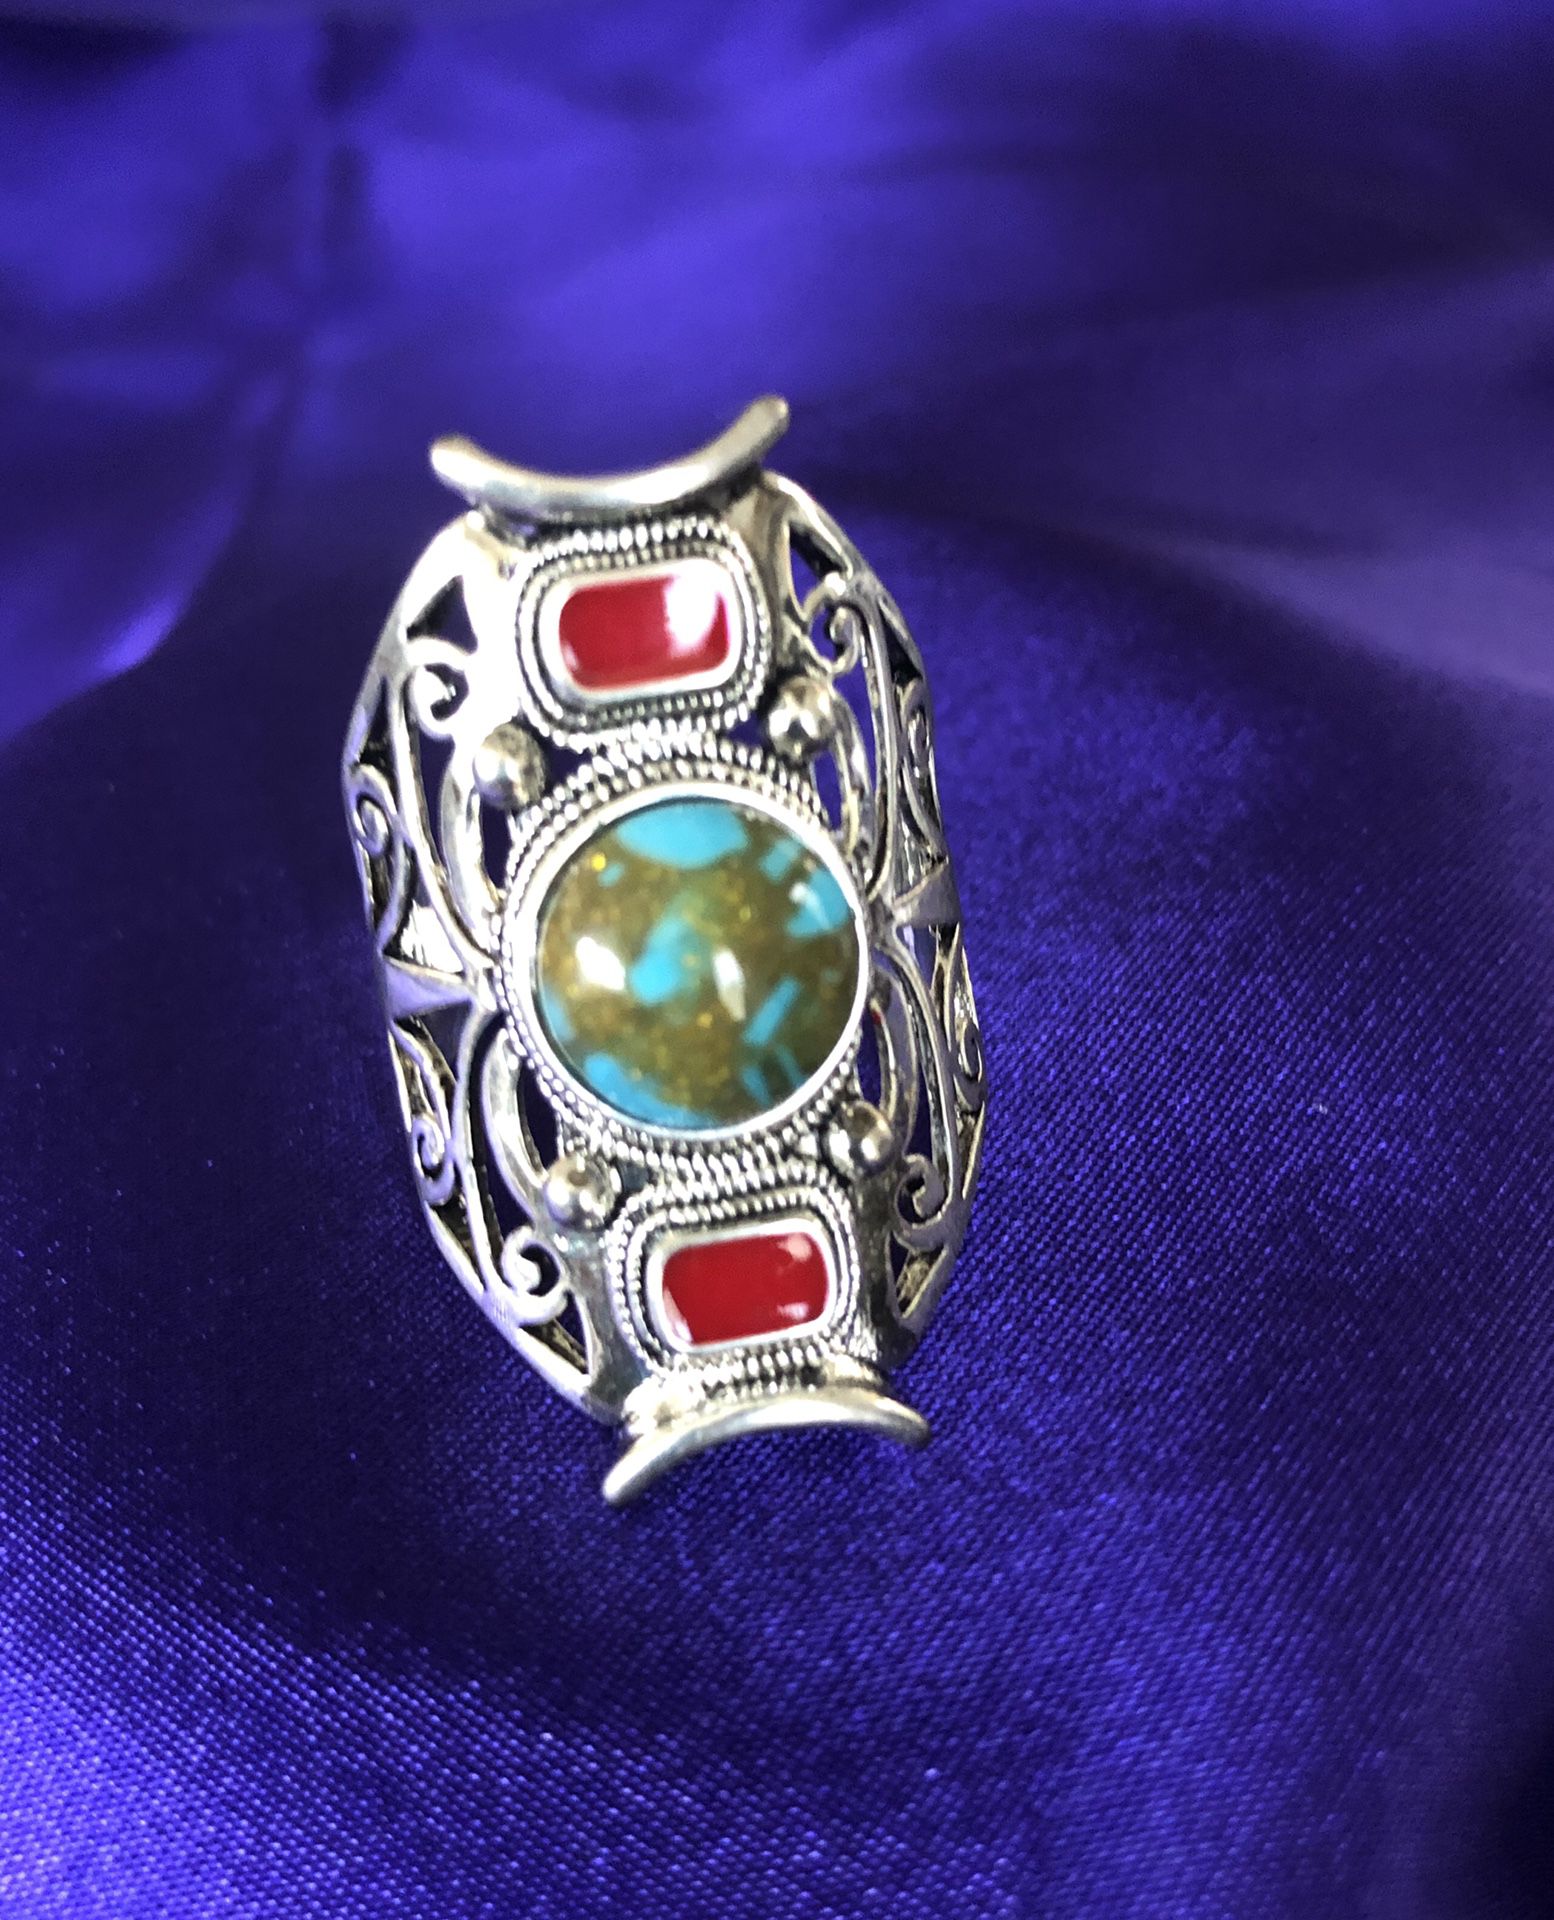 Size 8 Hand made Ring with Pretty Turquoise Stones